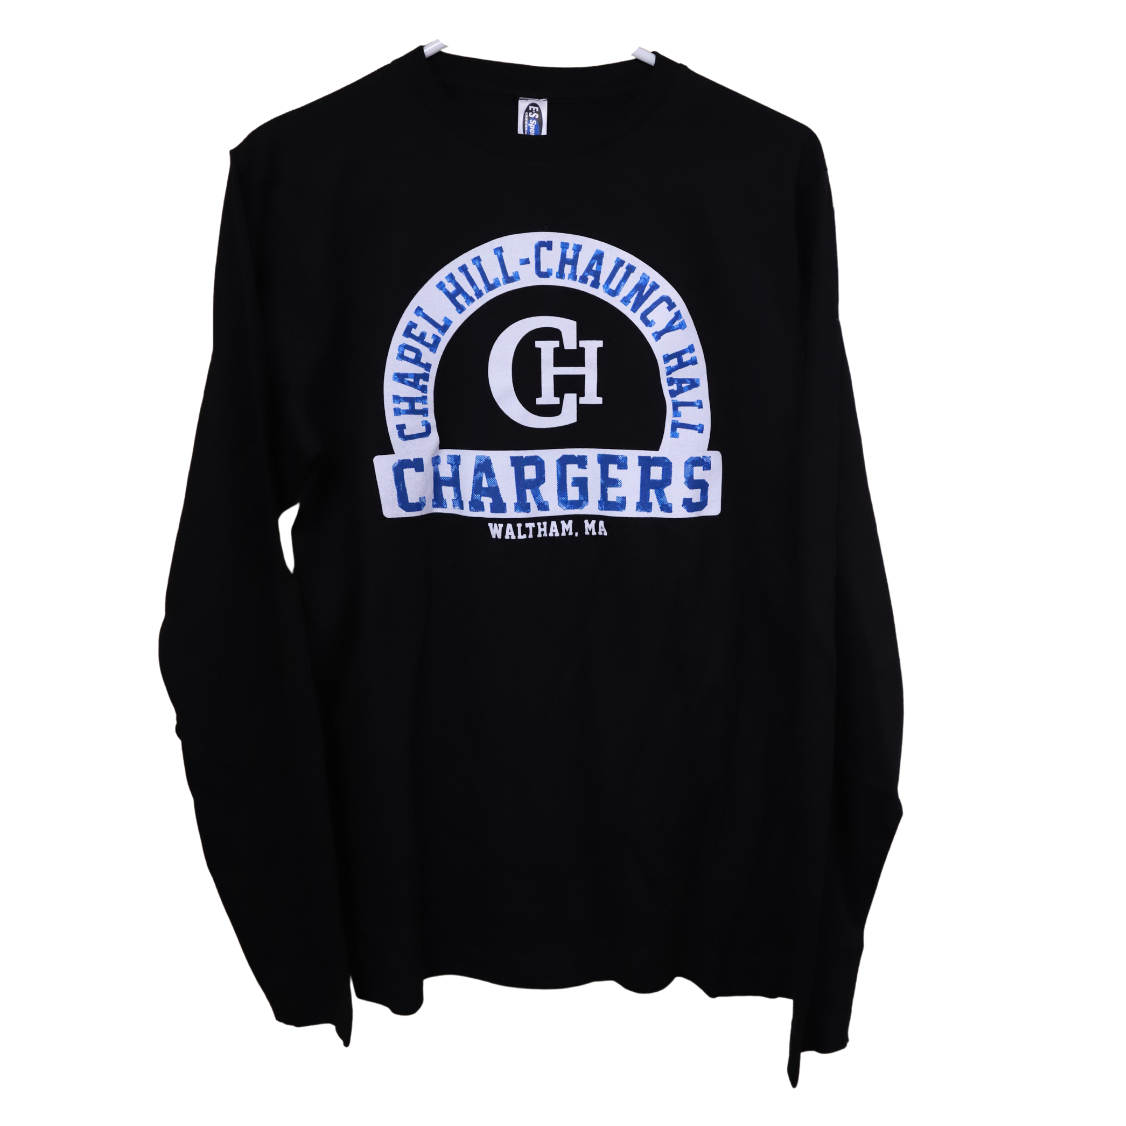 Chargers Tee, LS